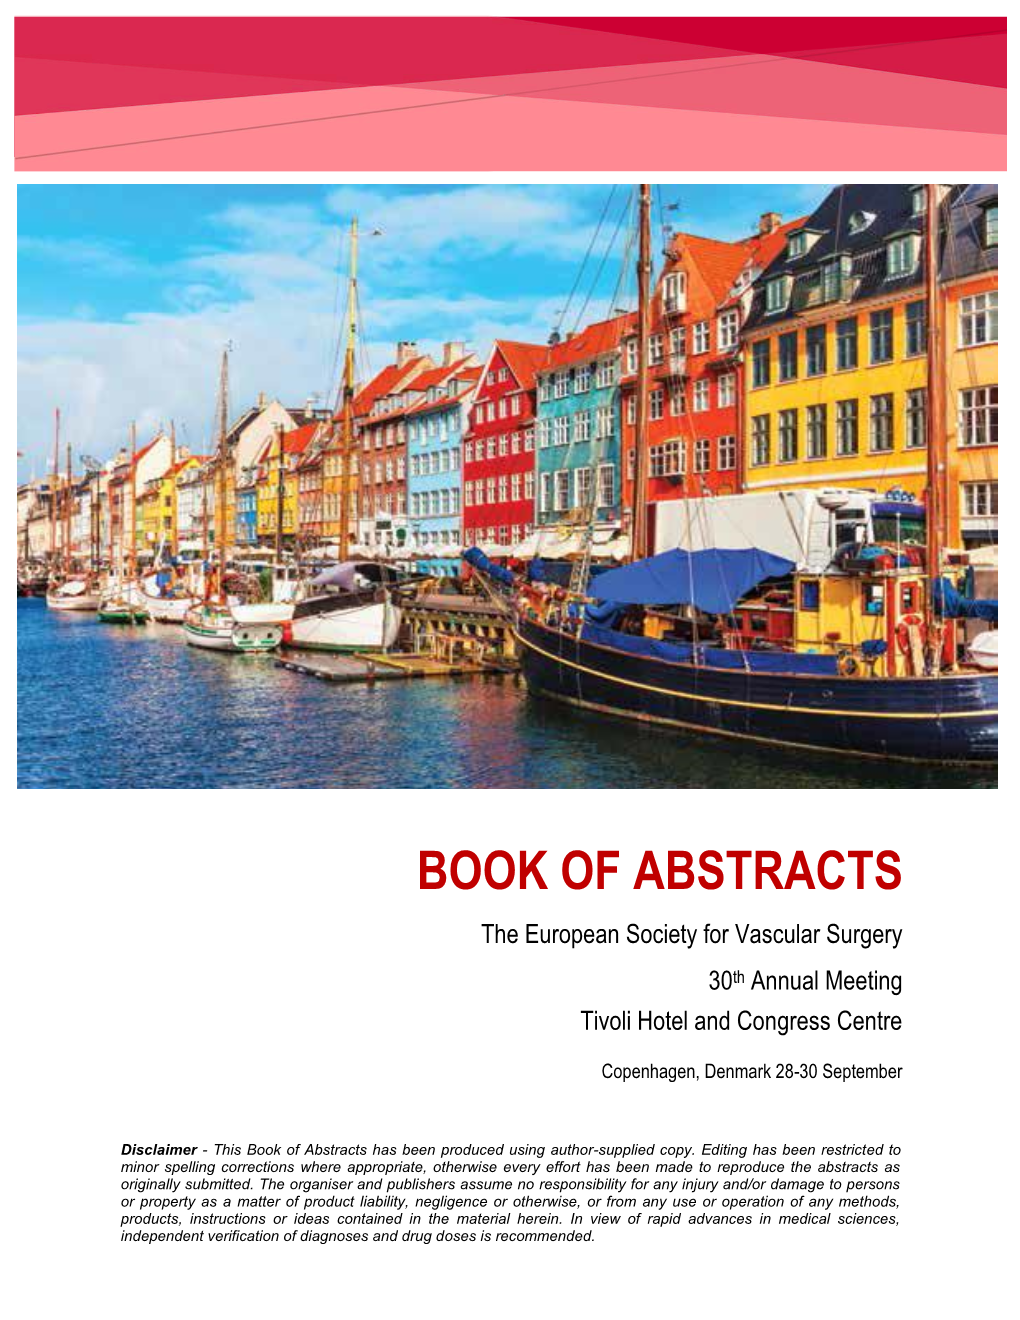 BOOK of ABSTRACTS the European Society for Vascular Surgery 30Th Annual Meeting Tivoli Hotel and Congress Centre